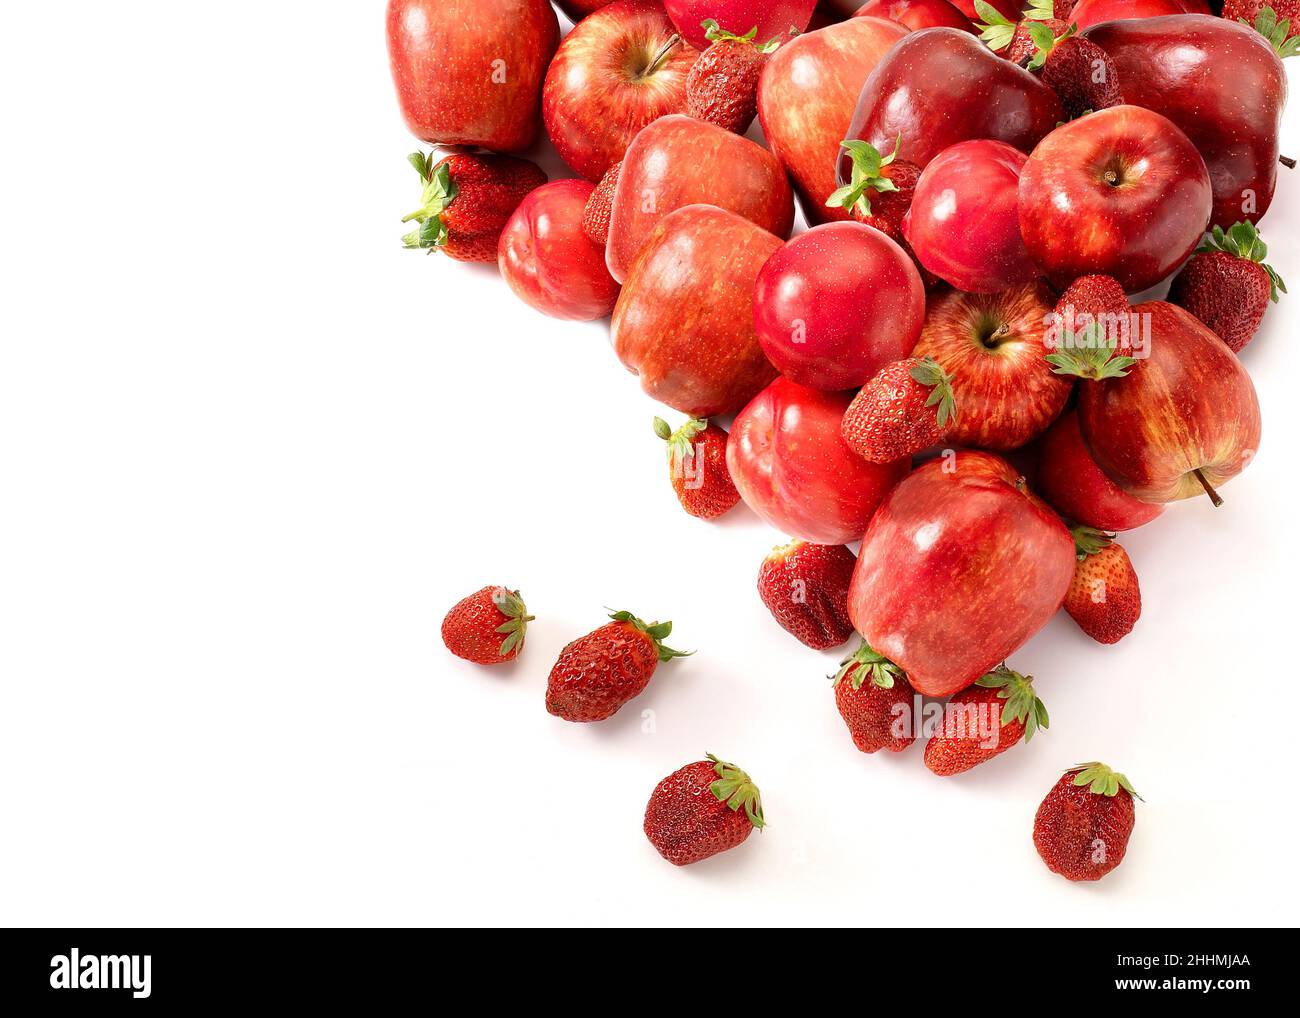 Plums, apples and strawberry fruits arrangement up view with a copy space. Red color setting. Stock Photo